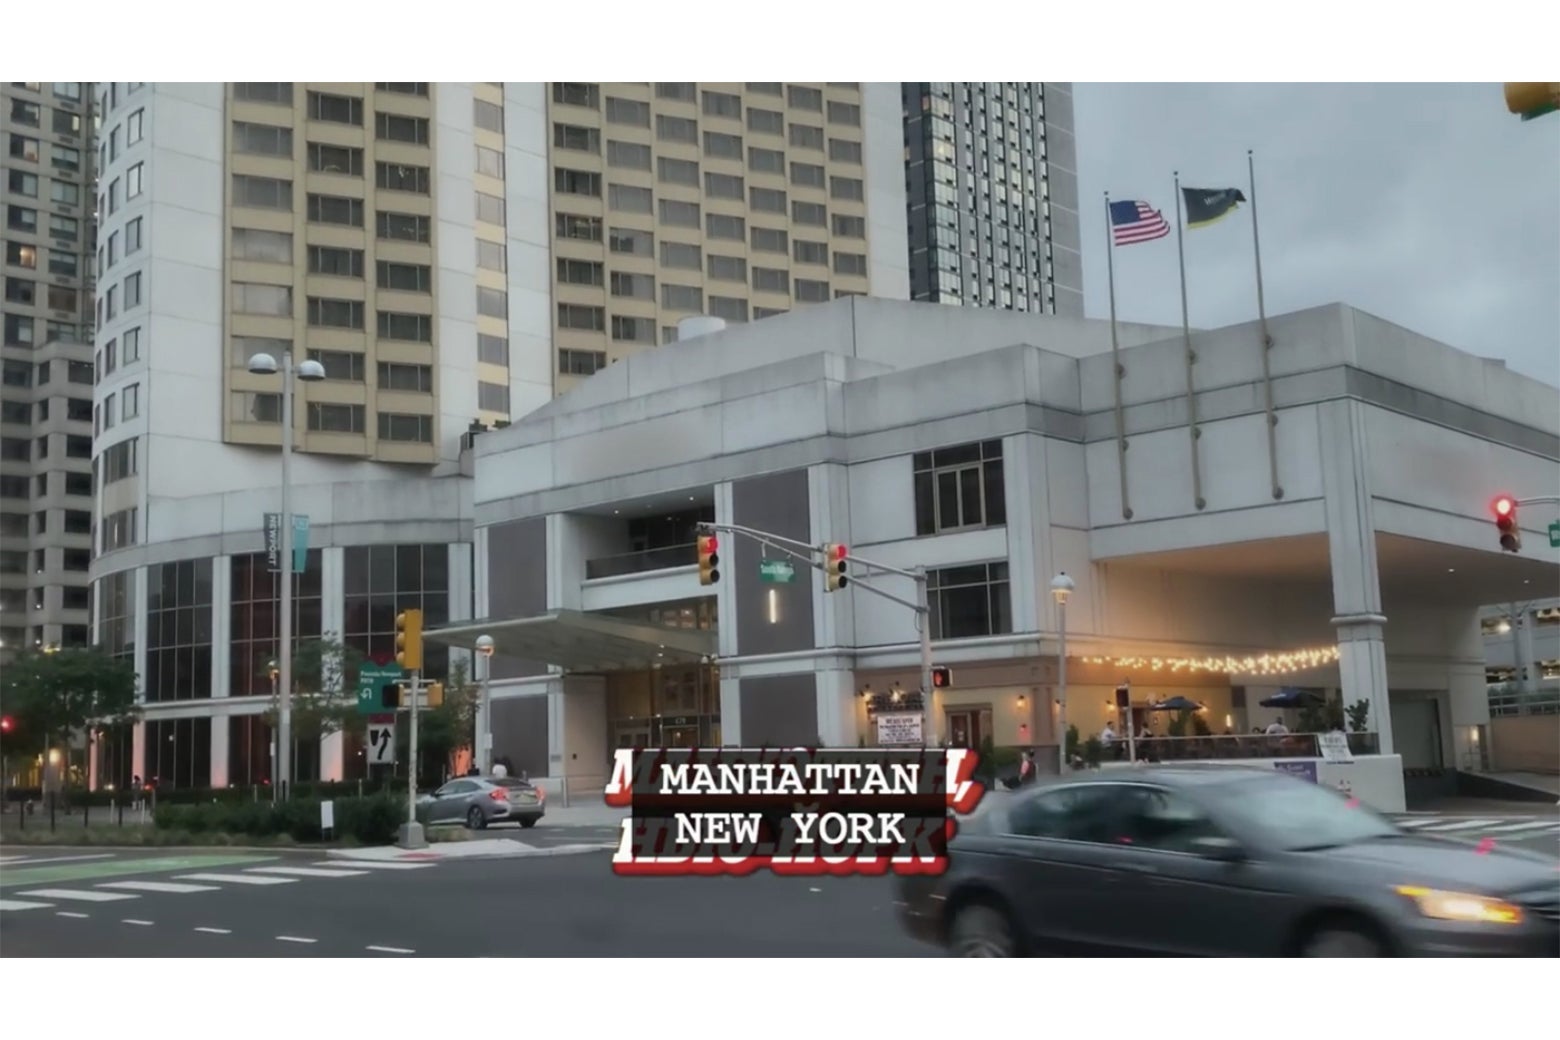 An establishing shot from Borat of the exterior of a large hotel, with the caption "Manhattan, New York"